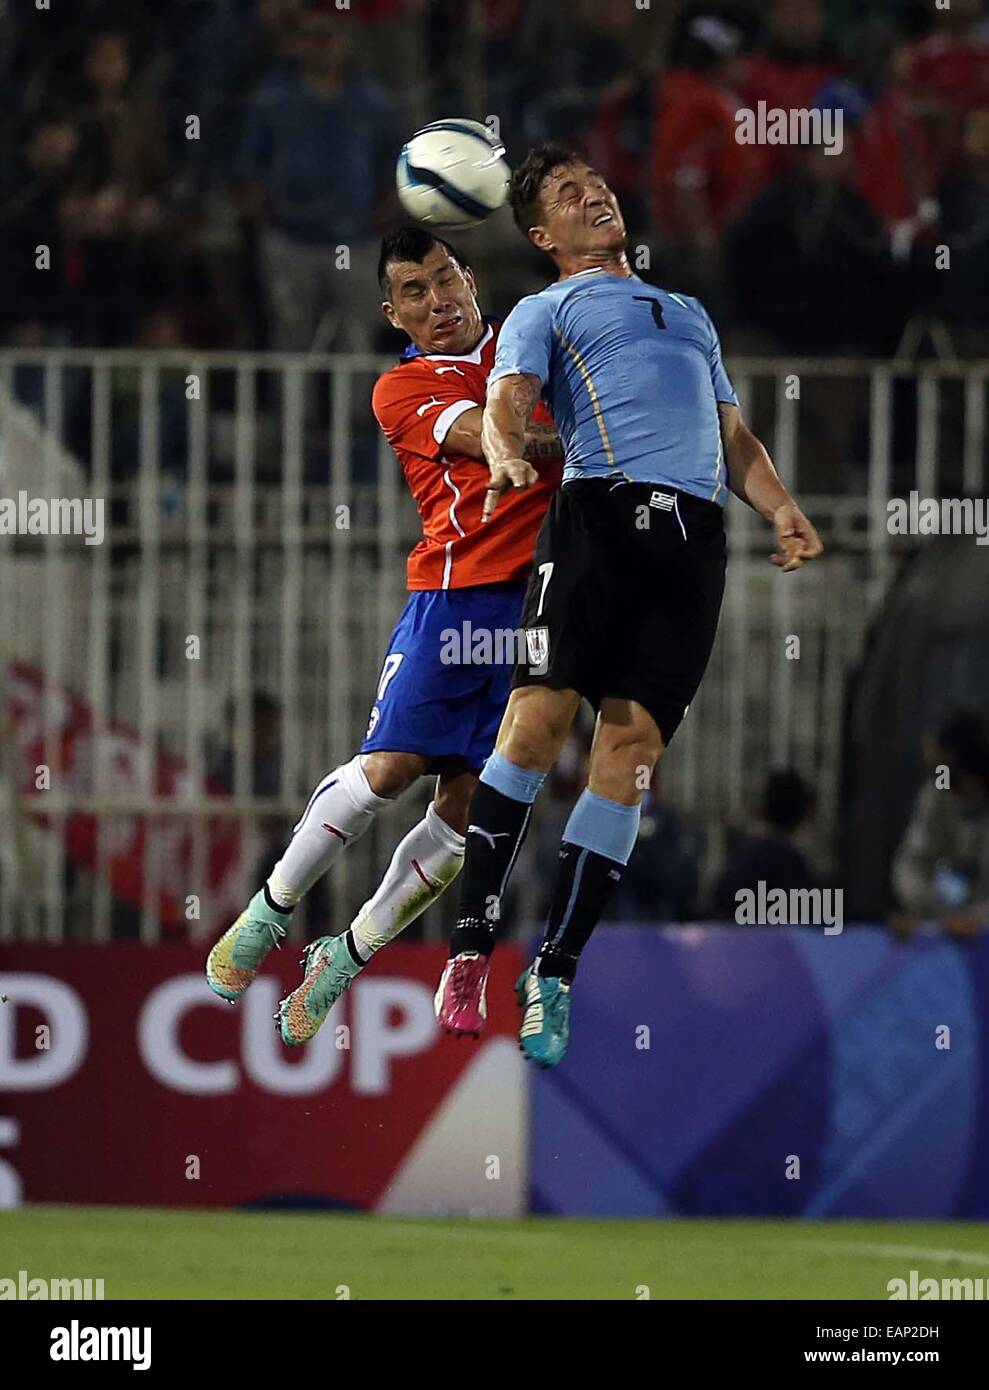 Santiago, Chile. 18th Nov, 2014. Image provided by National Association of Professional Soccer (ANFP, for its acronym in Spanish) of Chile shows Chile's Gary Medel (L) vying with Cristian Rodriguez (R) of Uruguay, during a friendly match at Monumental Stadium, in Santiago, Chile, on Nov. 18, 2014. © ANFP/Xinhua/Alamy Live News Stock Photo